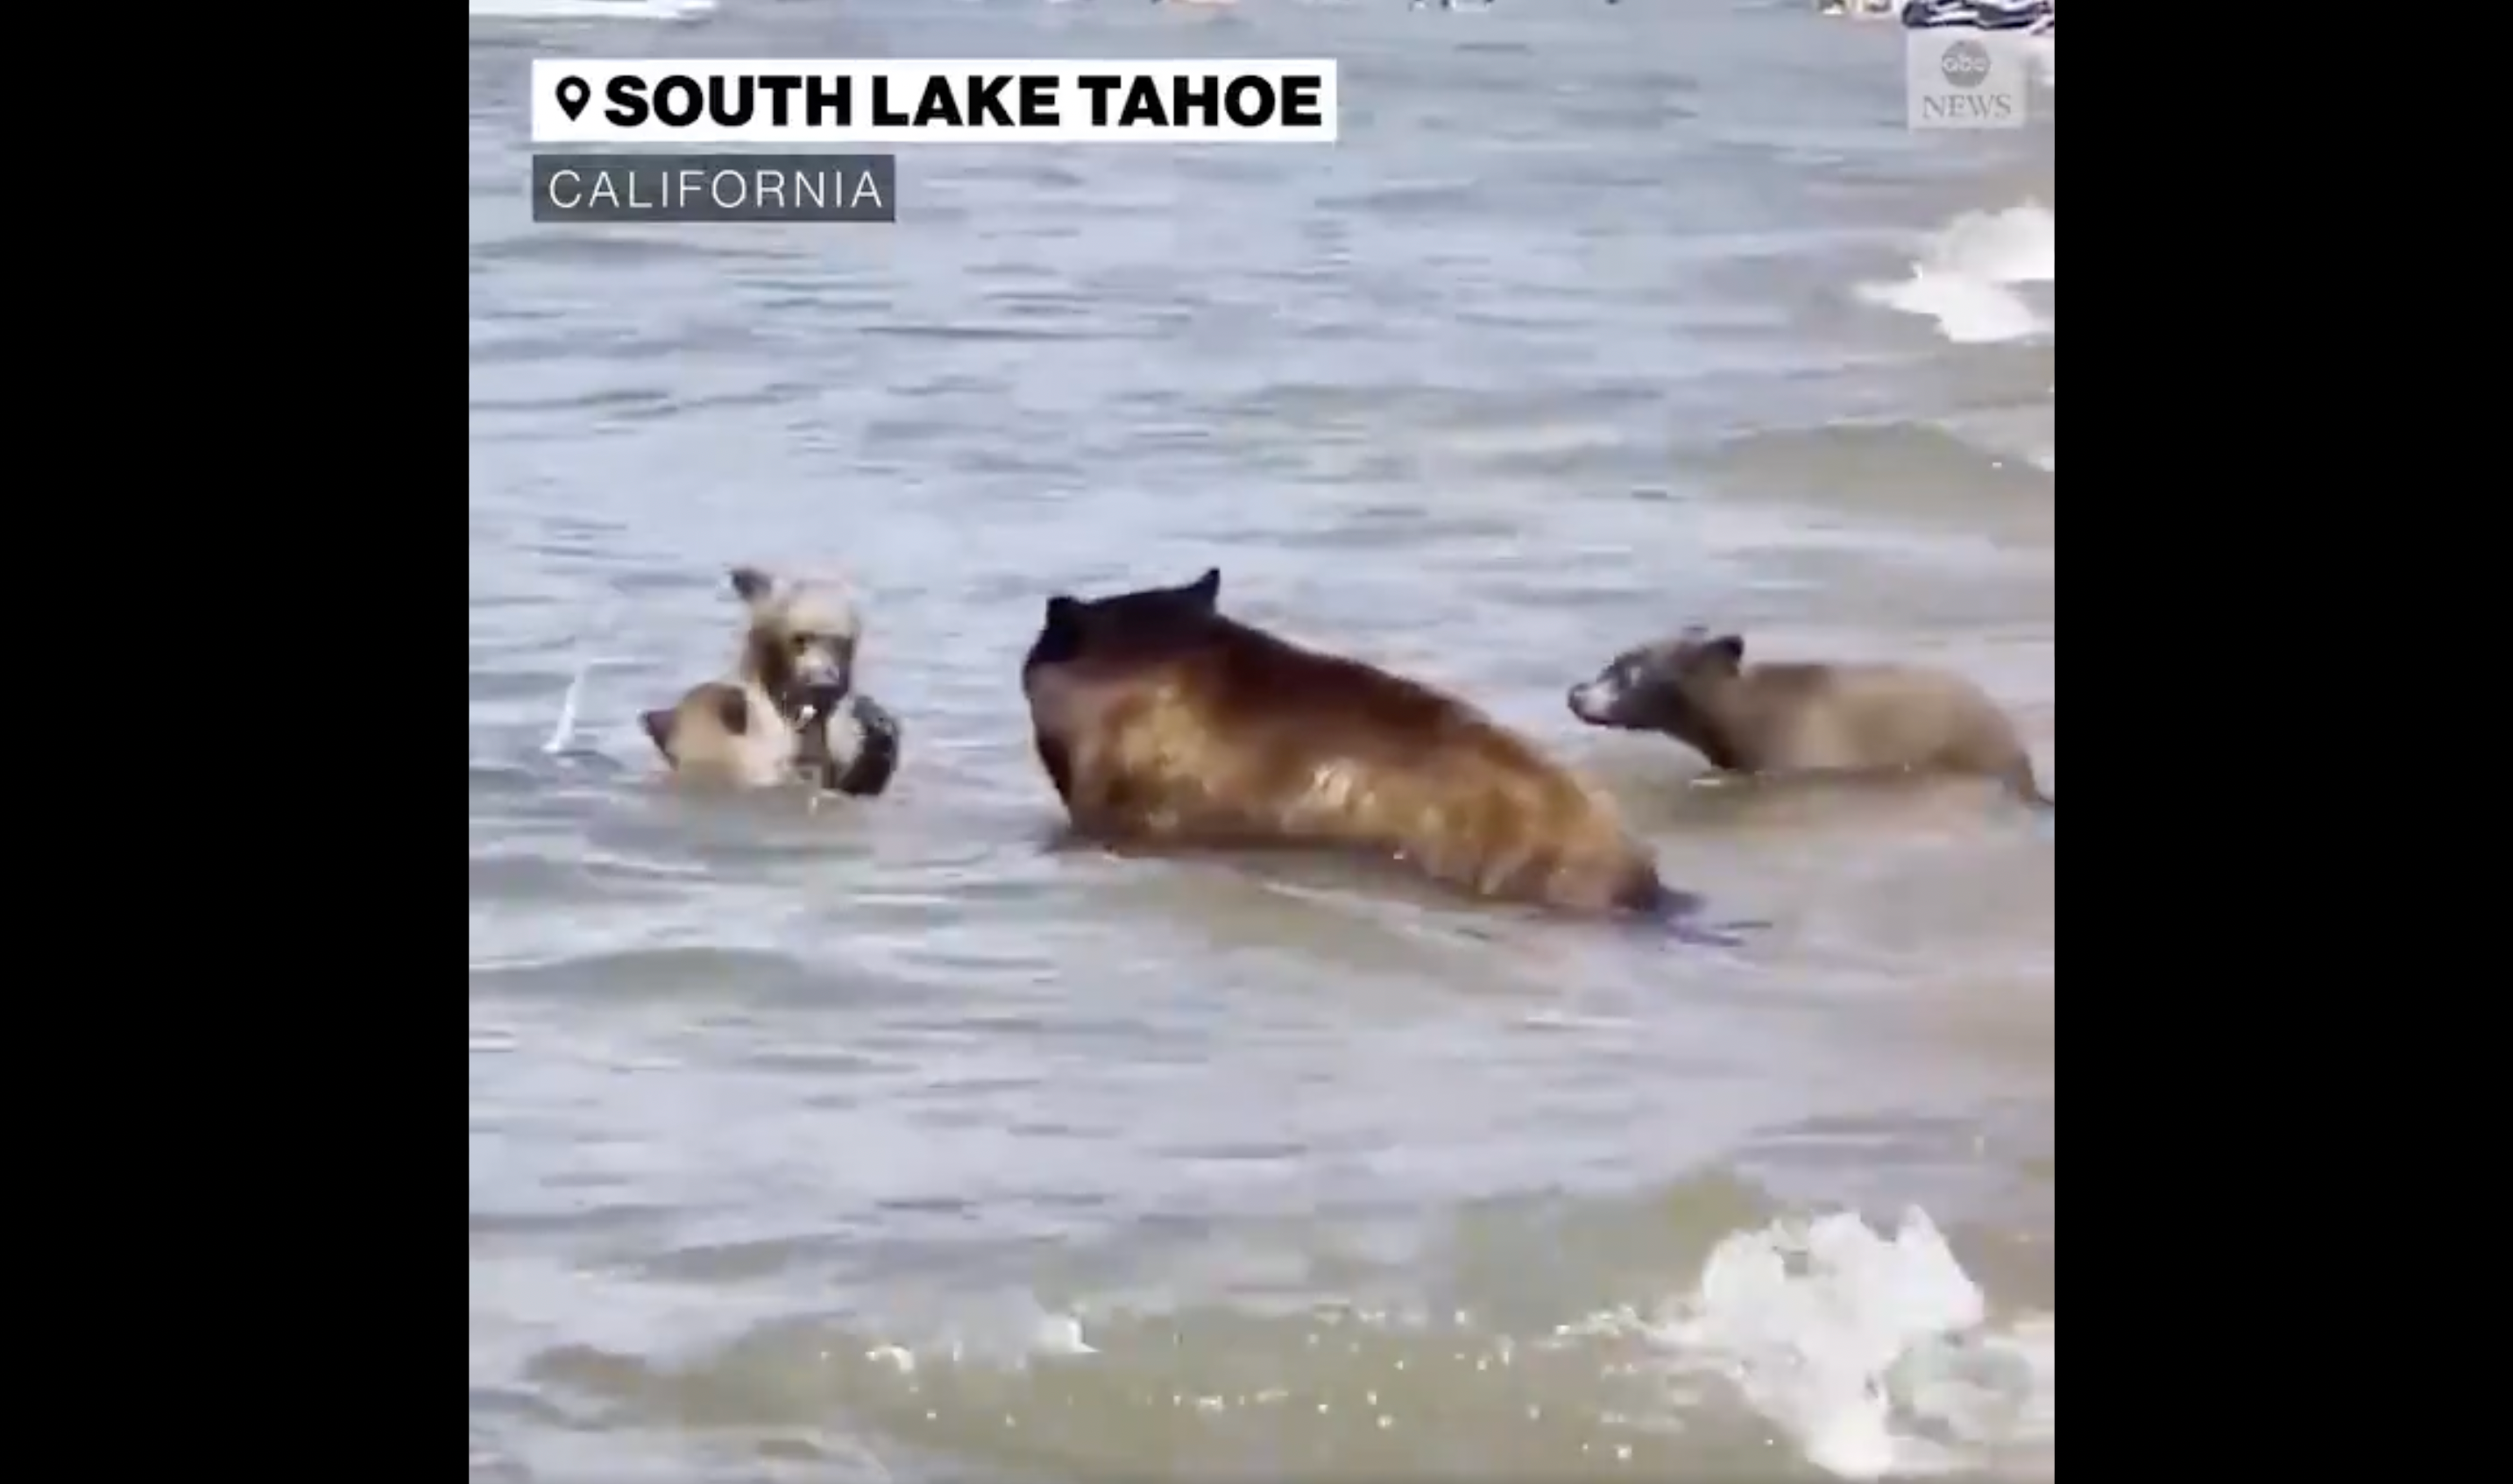 A mother black bear and her three cubs were seen swimming on a packed beach in California